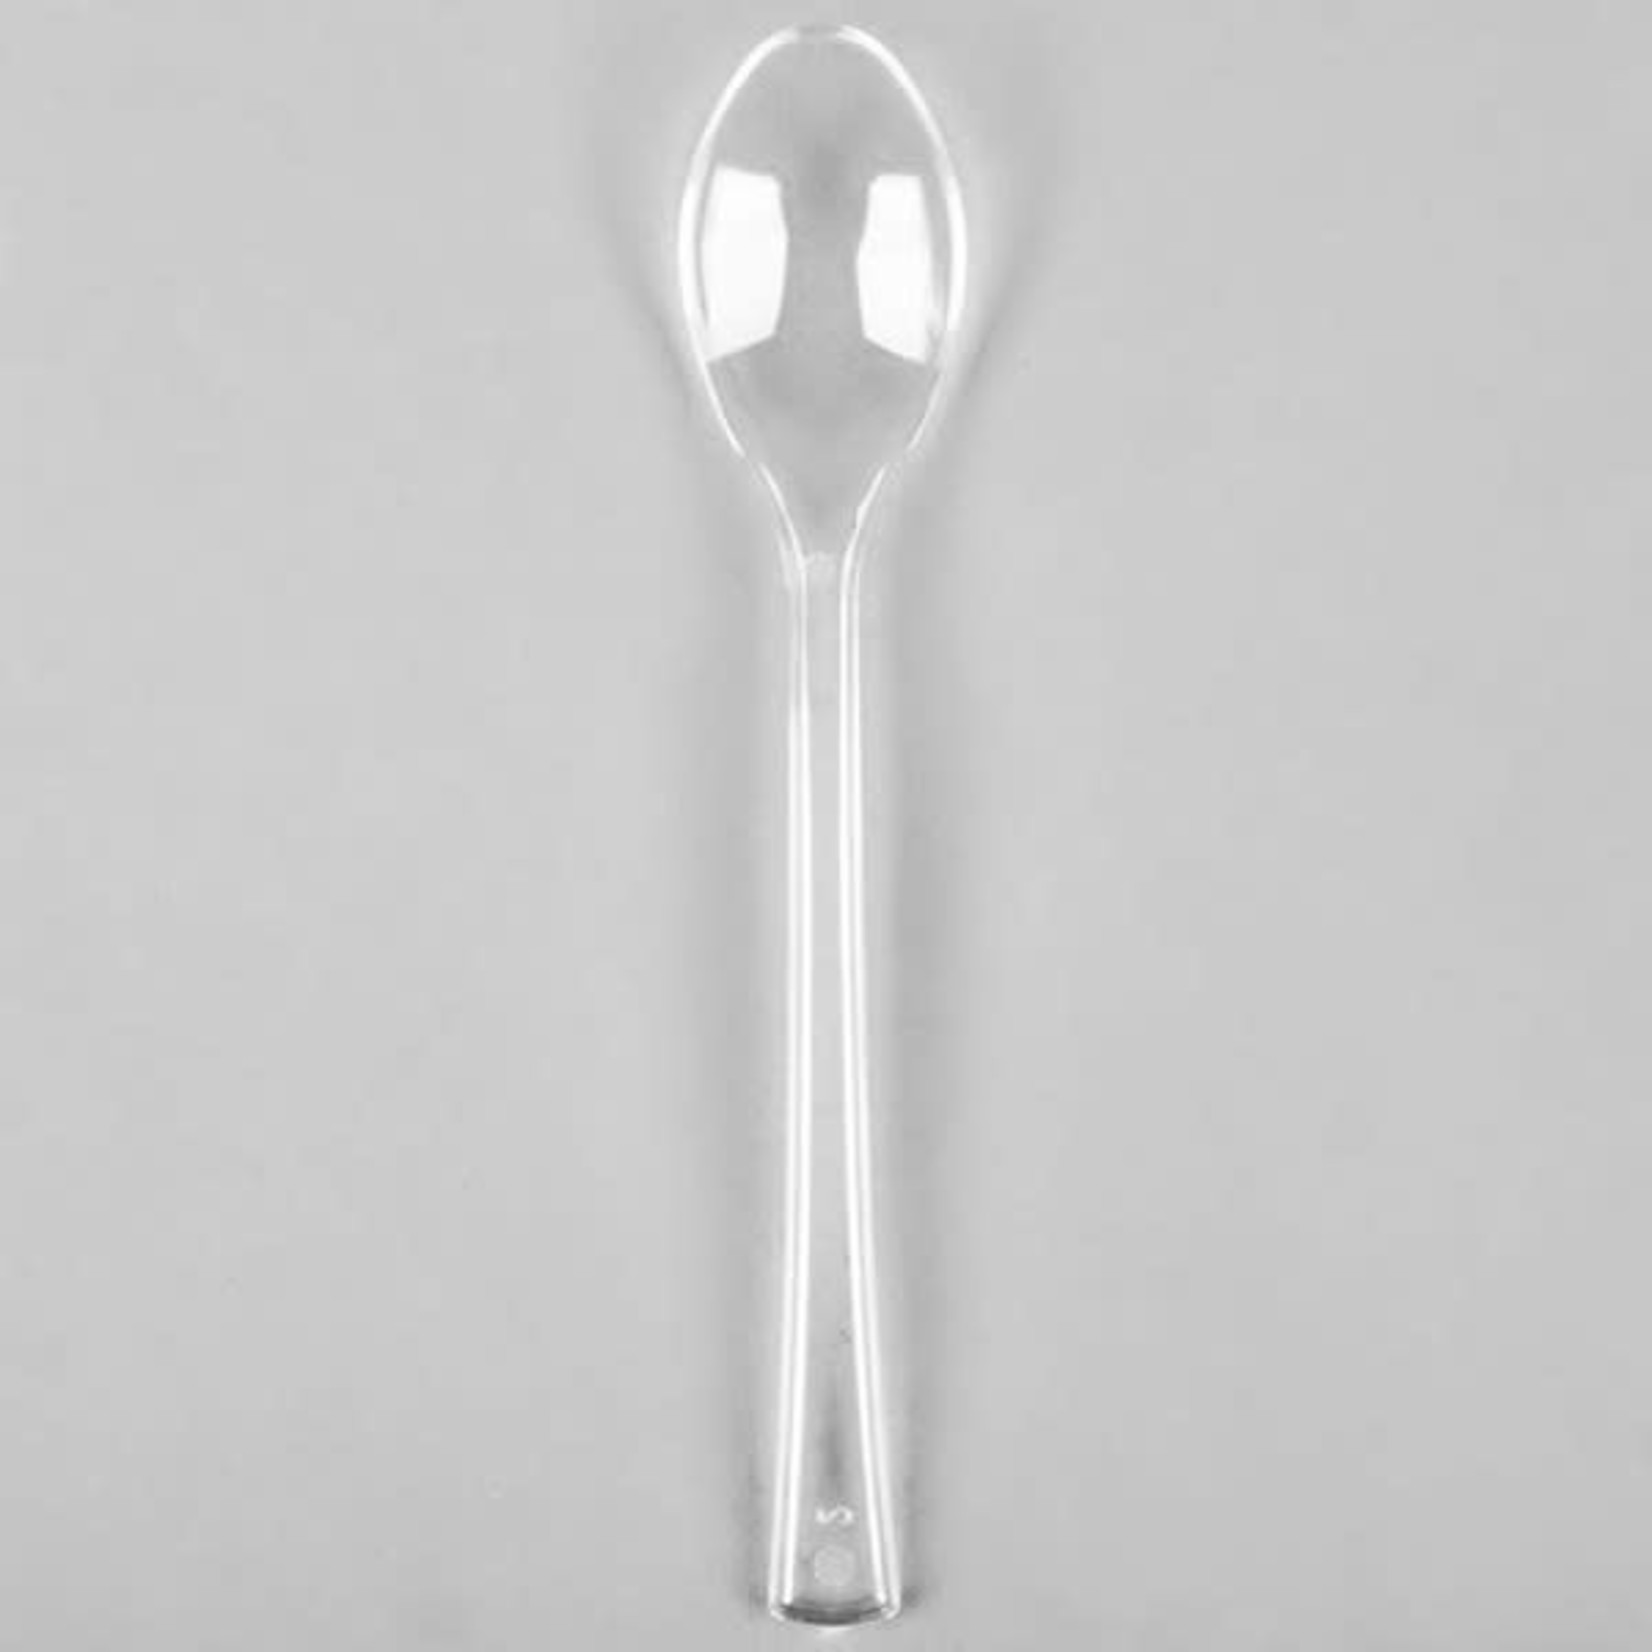 Webstaurant Clear Plastic Tiny Spoon 4” - 48/pack